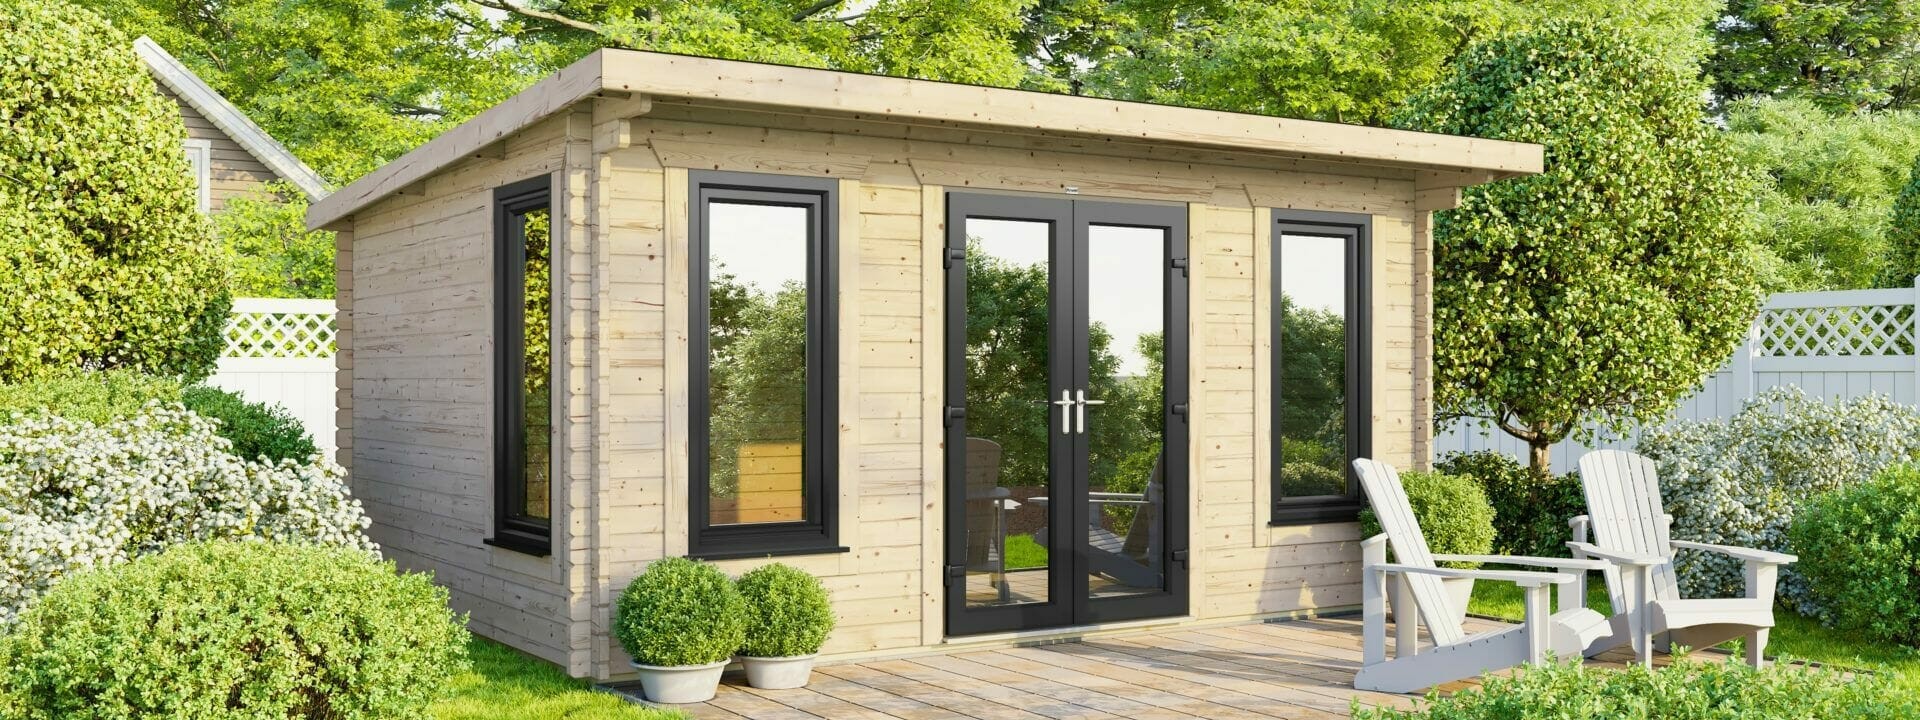 Power Log Cabins - Expand Your Space with Style and Practicality